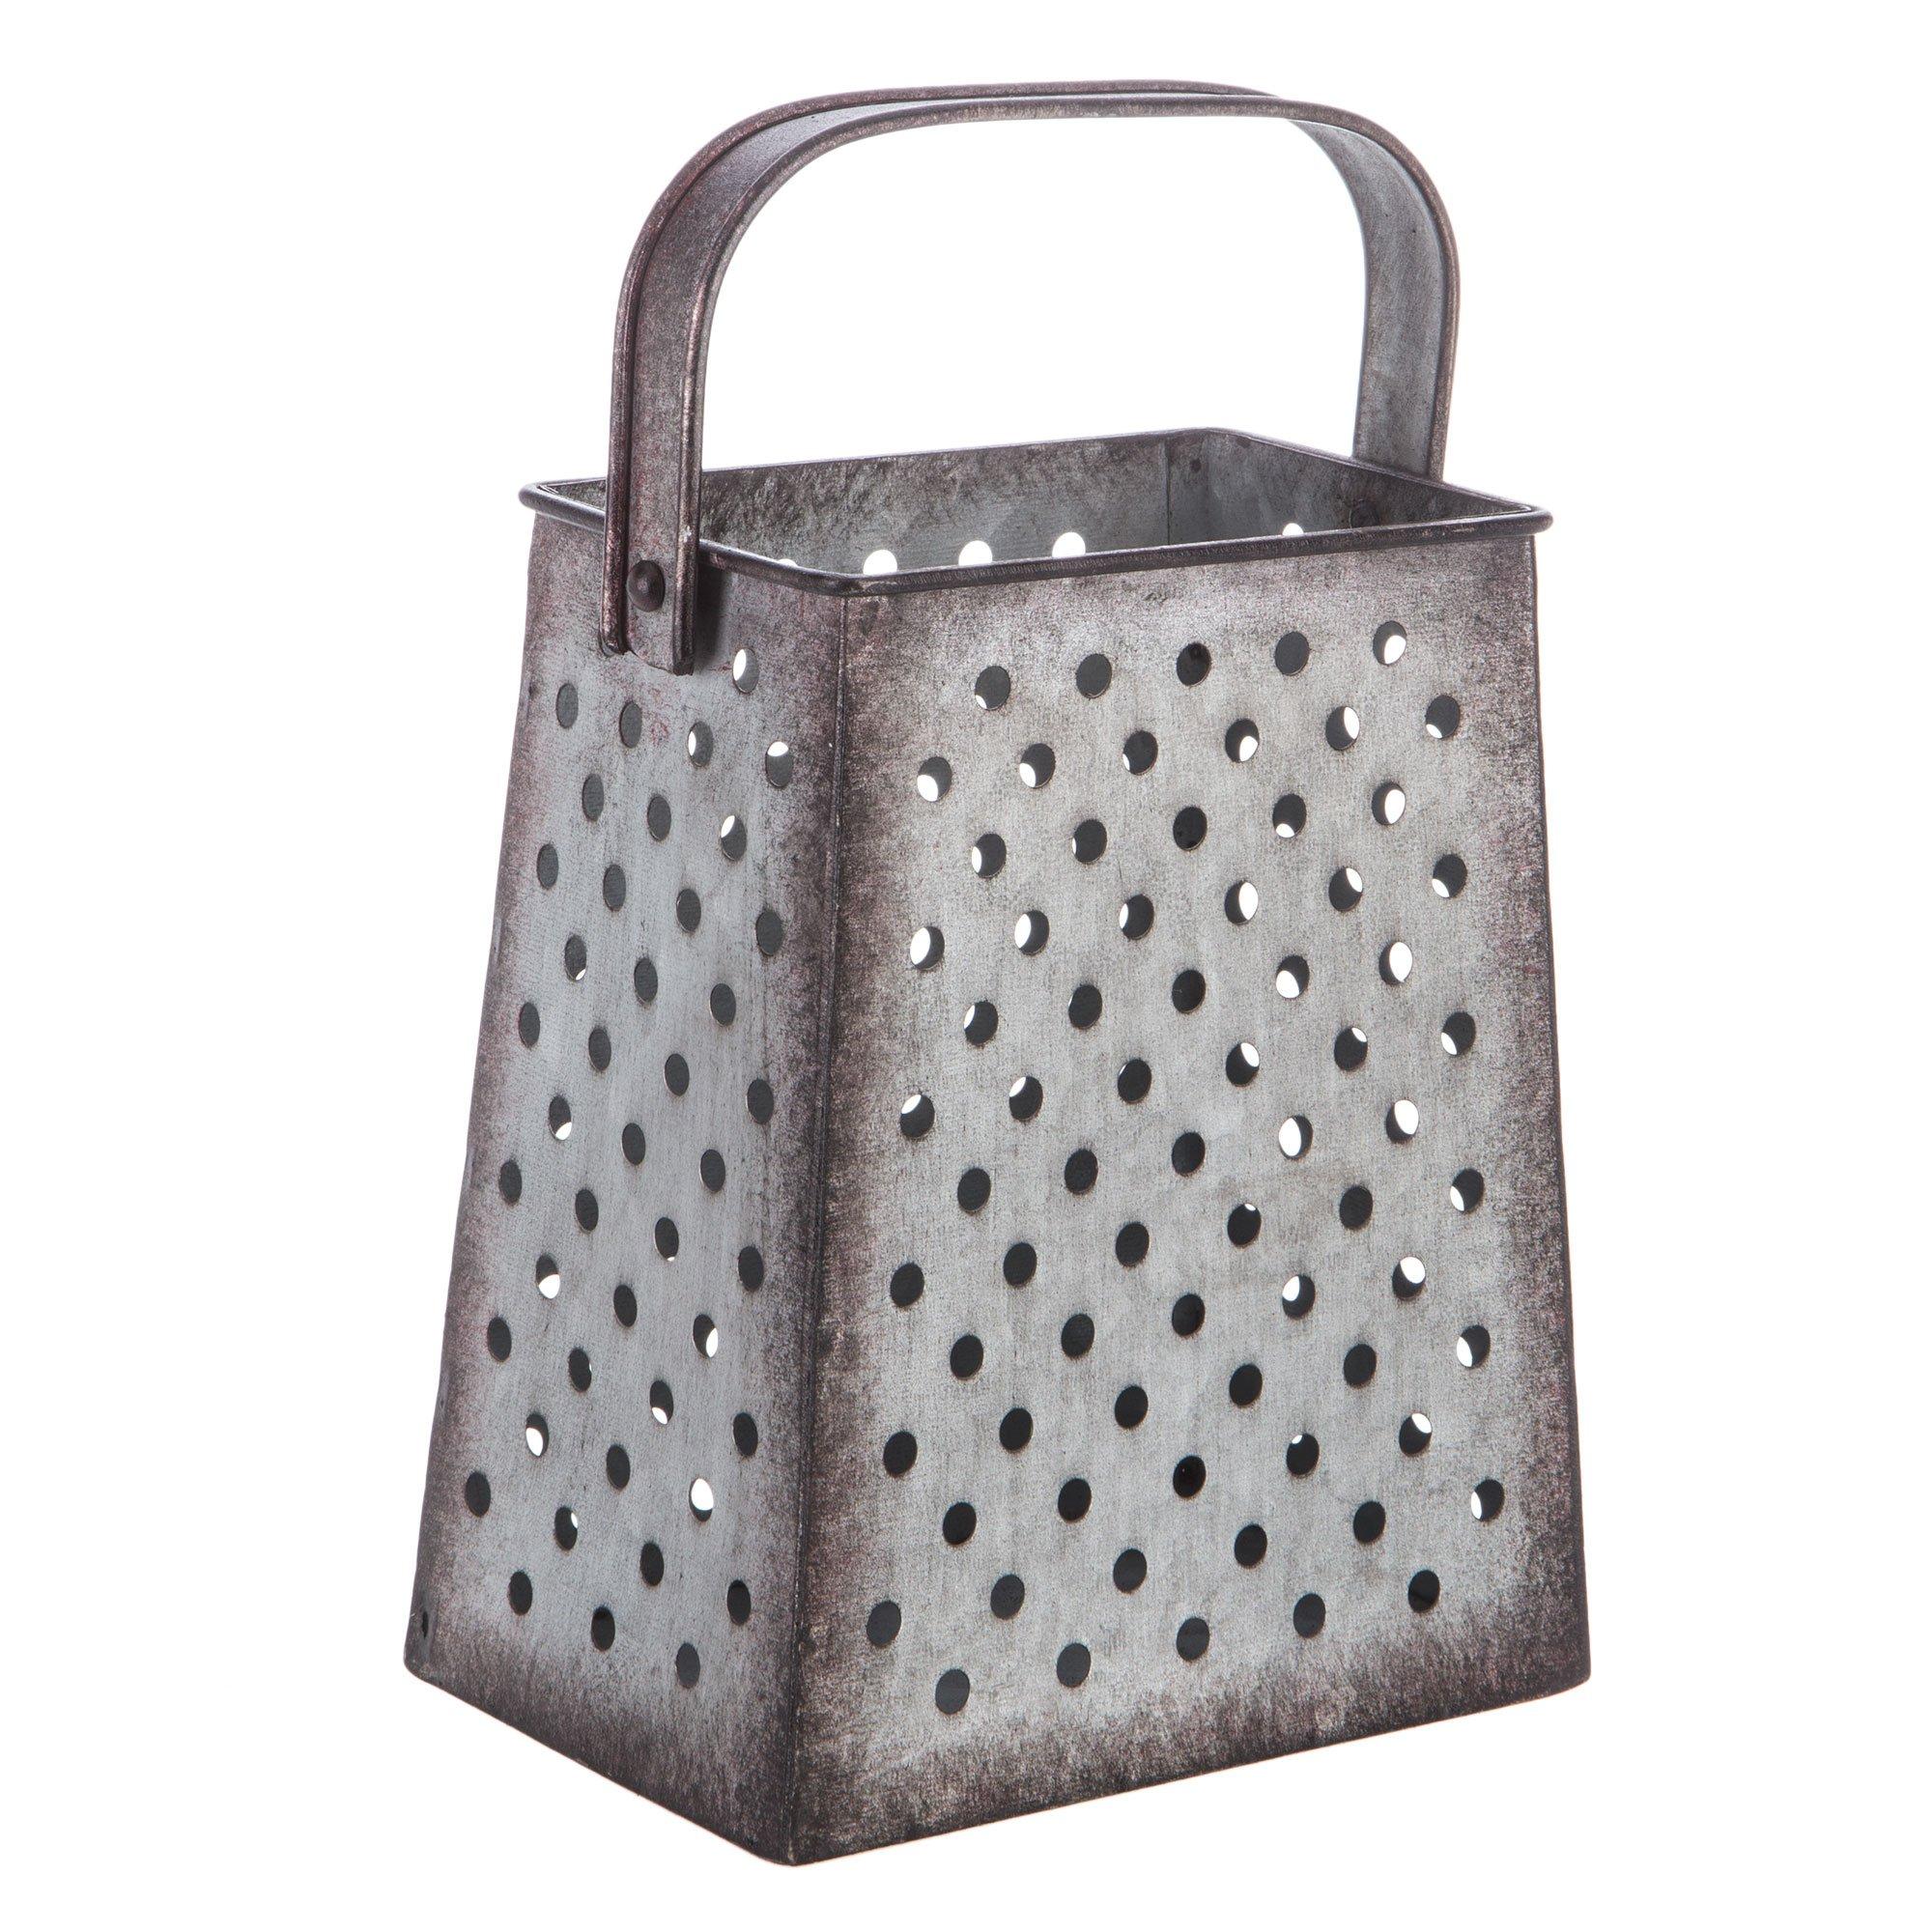 Galvanized Metal Cheese Grater Wall Decor